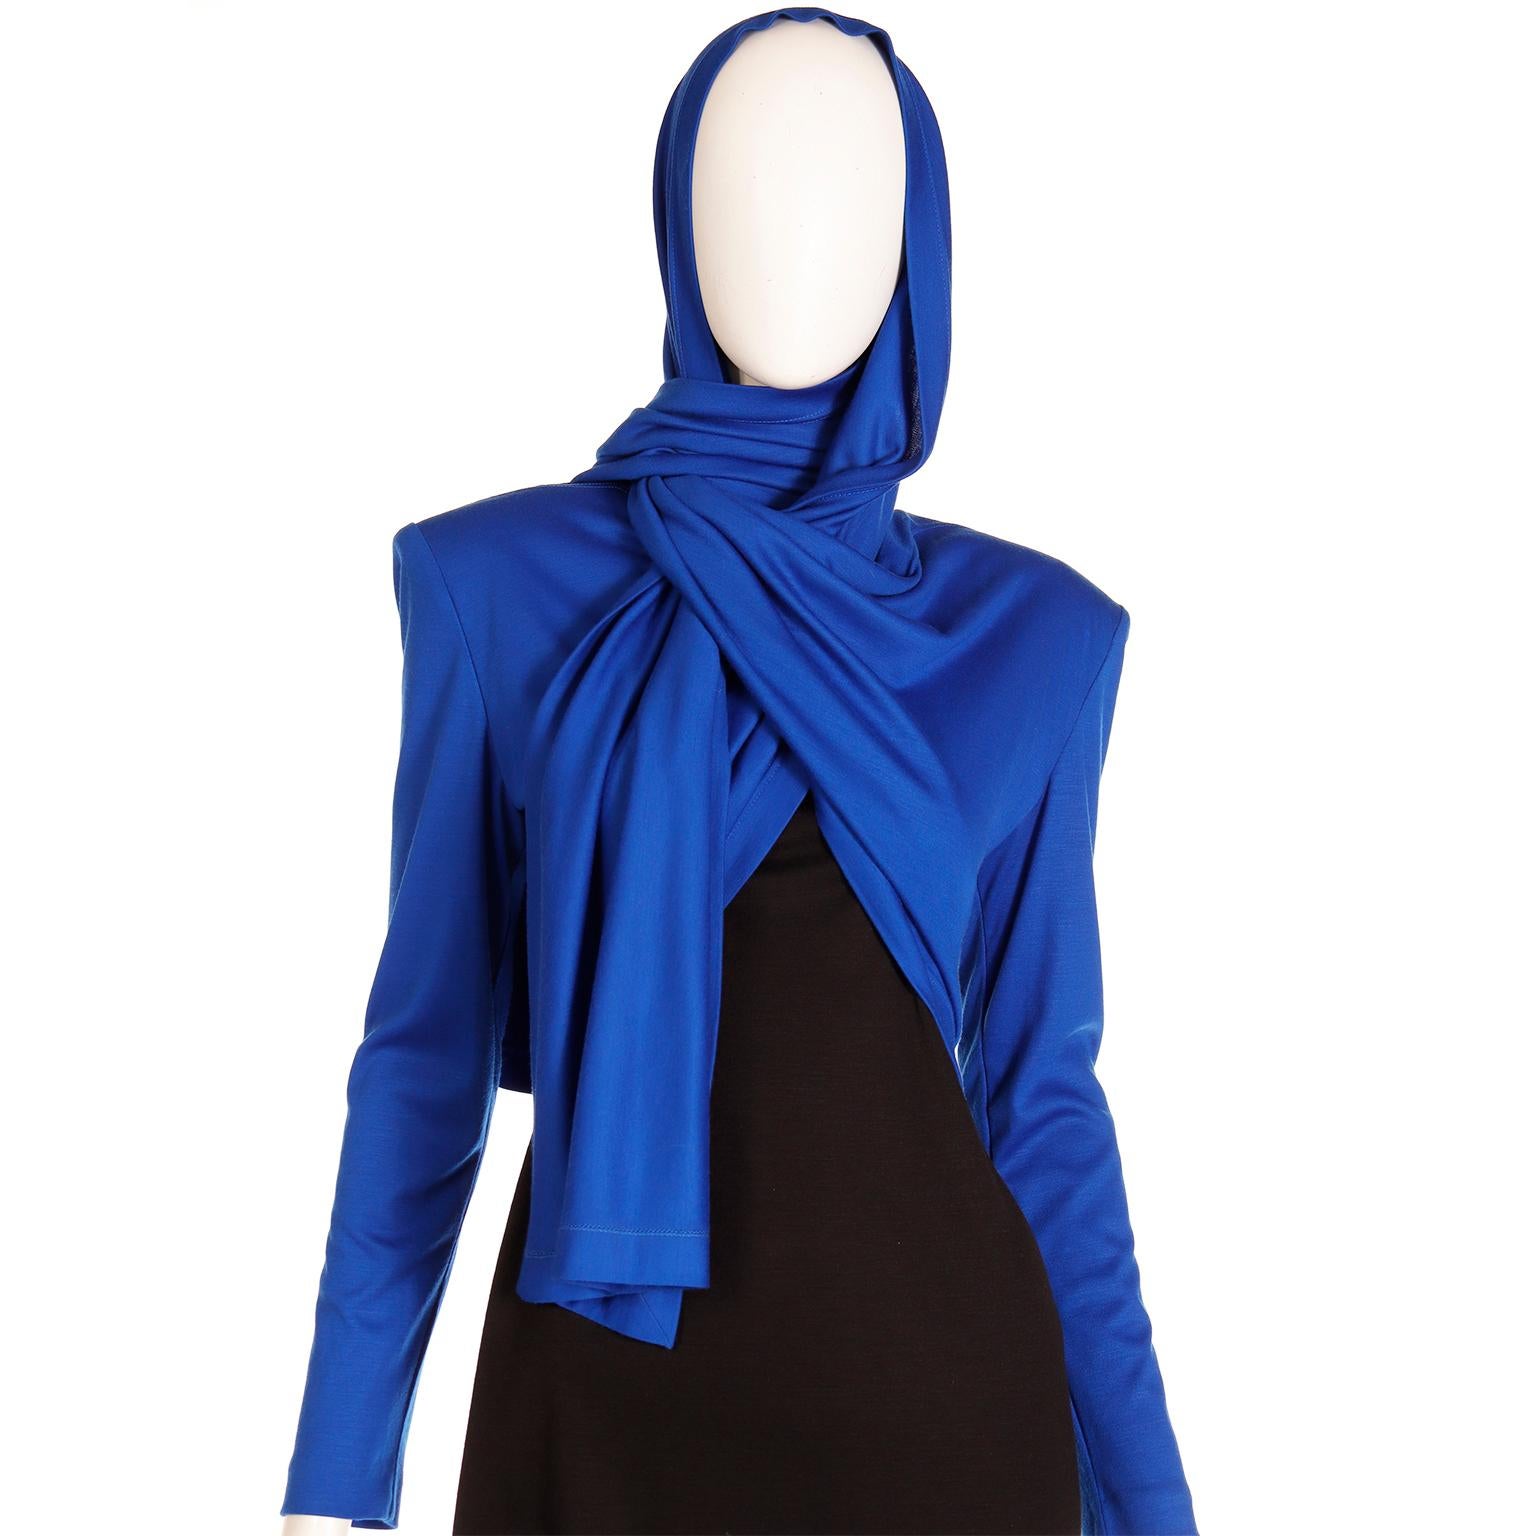 FW 1989 Patrick Kelly Runway Dress in Blue & Black Knit with Head Scarf  For Sale 11